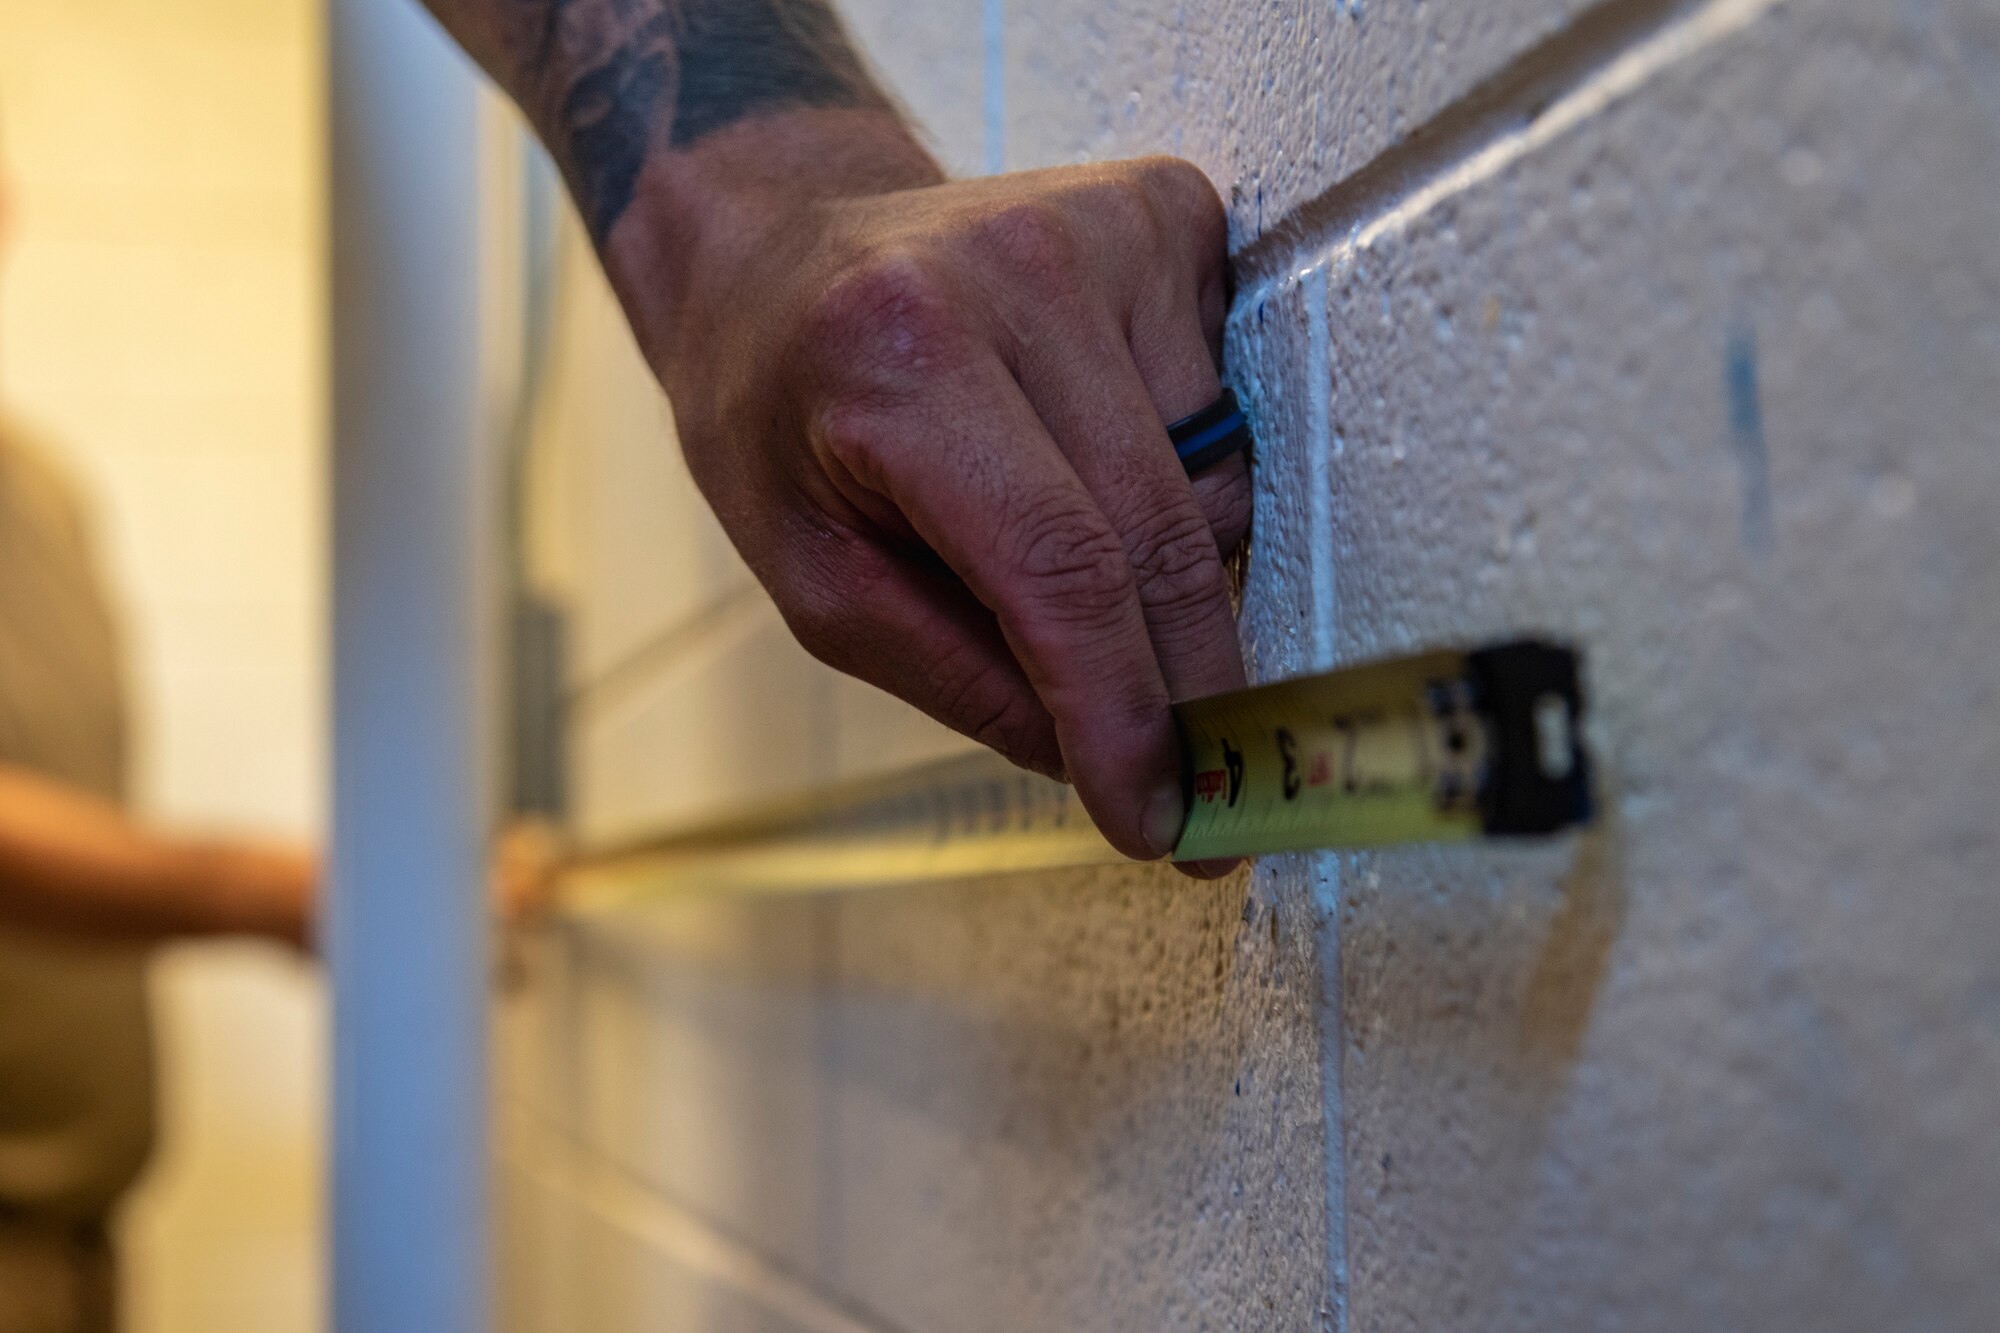 Airmen from the 23d Civil Engineer Squadron (CES) Water and Fuels Systems Maintenance shop measure a wall, July 2, 2019, at Moody Air Force Base, Ga. Airmen from the 23d CES Water and Fuels Systems Maintenance are on-call 24/7 to sustain and maintain the base, water, sewer and gas lines and upkeep of the 696 facilities with water and fuel infrastructure. (U.S. Air Force photo by Airman 1st Class Taryn Butler)